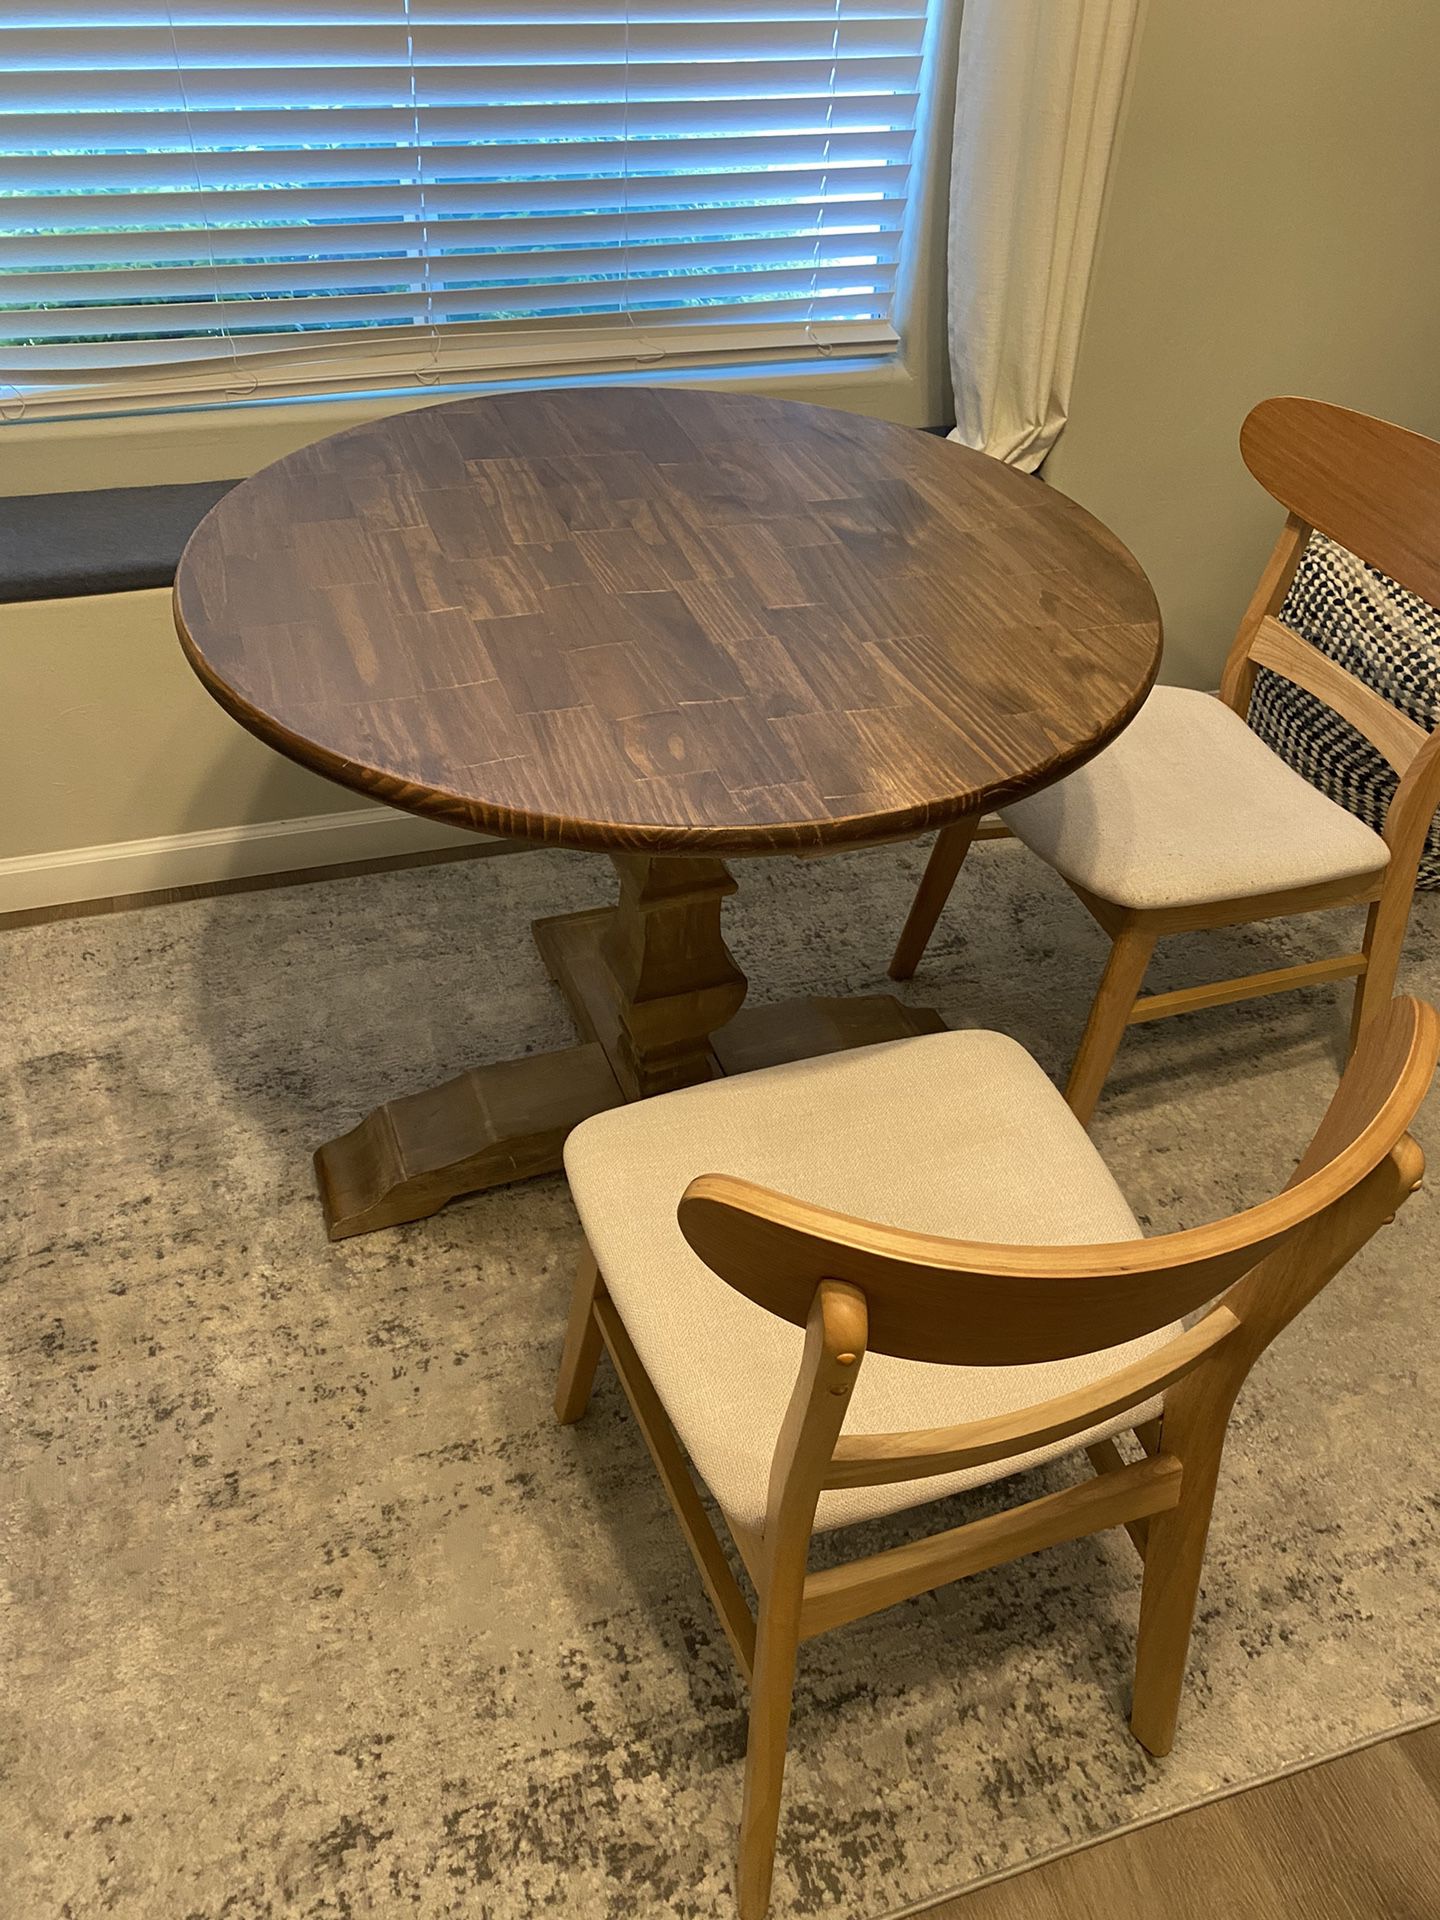 Small Kitchen Table With 2 Chairs